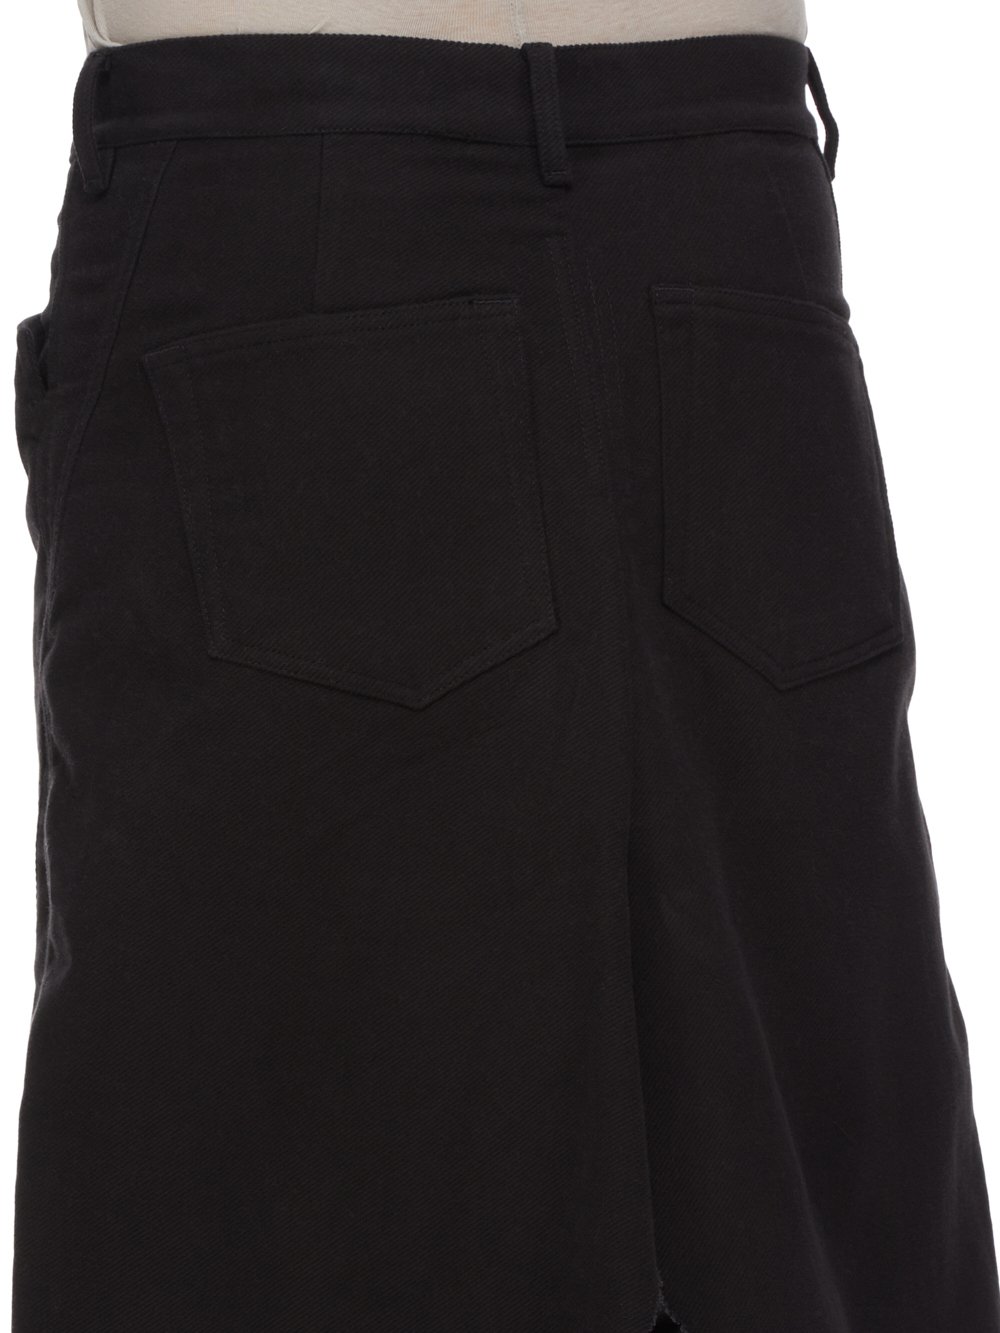 RICK OWENS FW23 LUXOR SLIVERED SKIRT IN  BLACK BRUSHED HEAVY TWILL